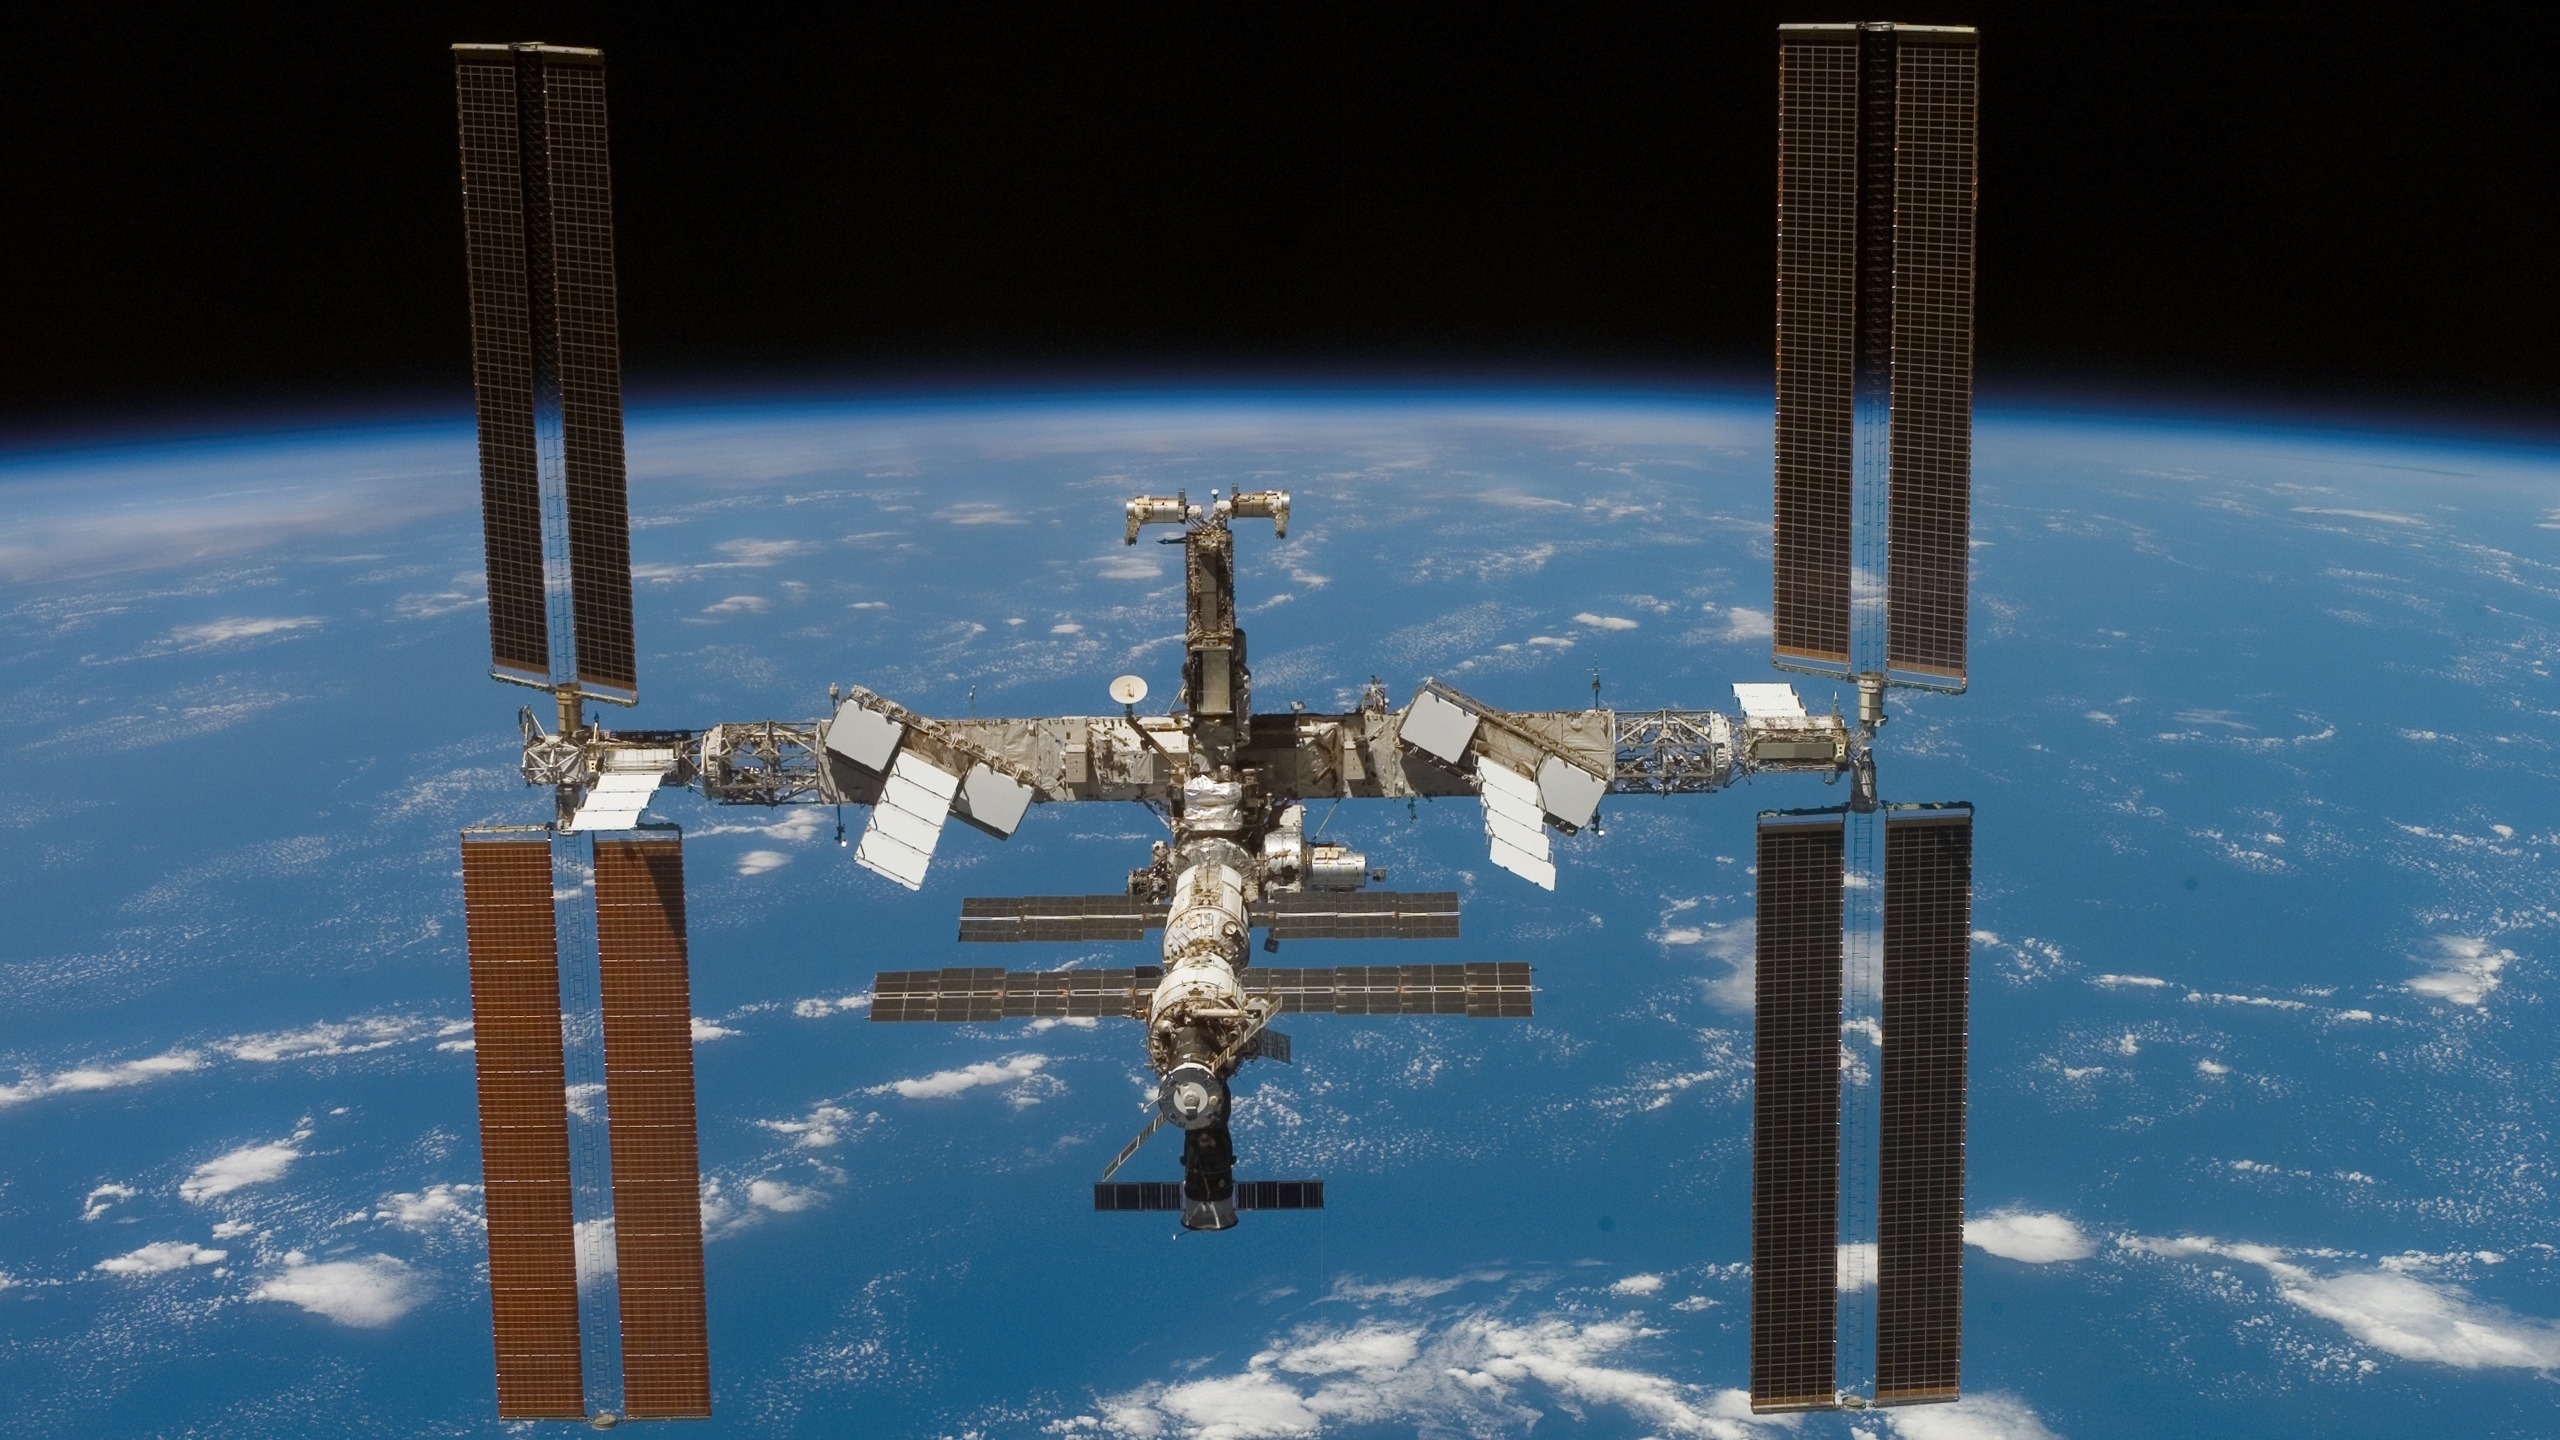 The Big Iss Earth Orbit for 2560x1440 HDTV resolution